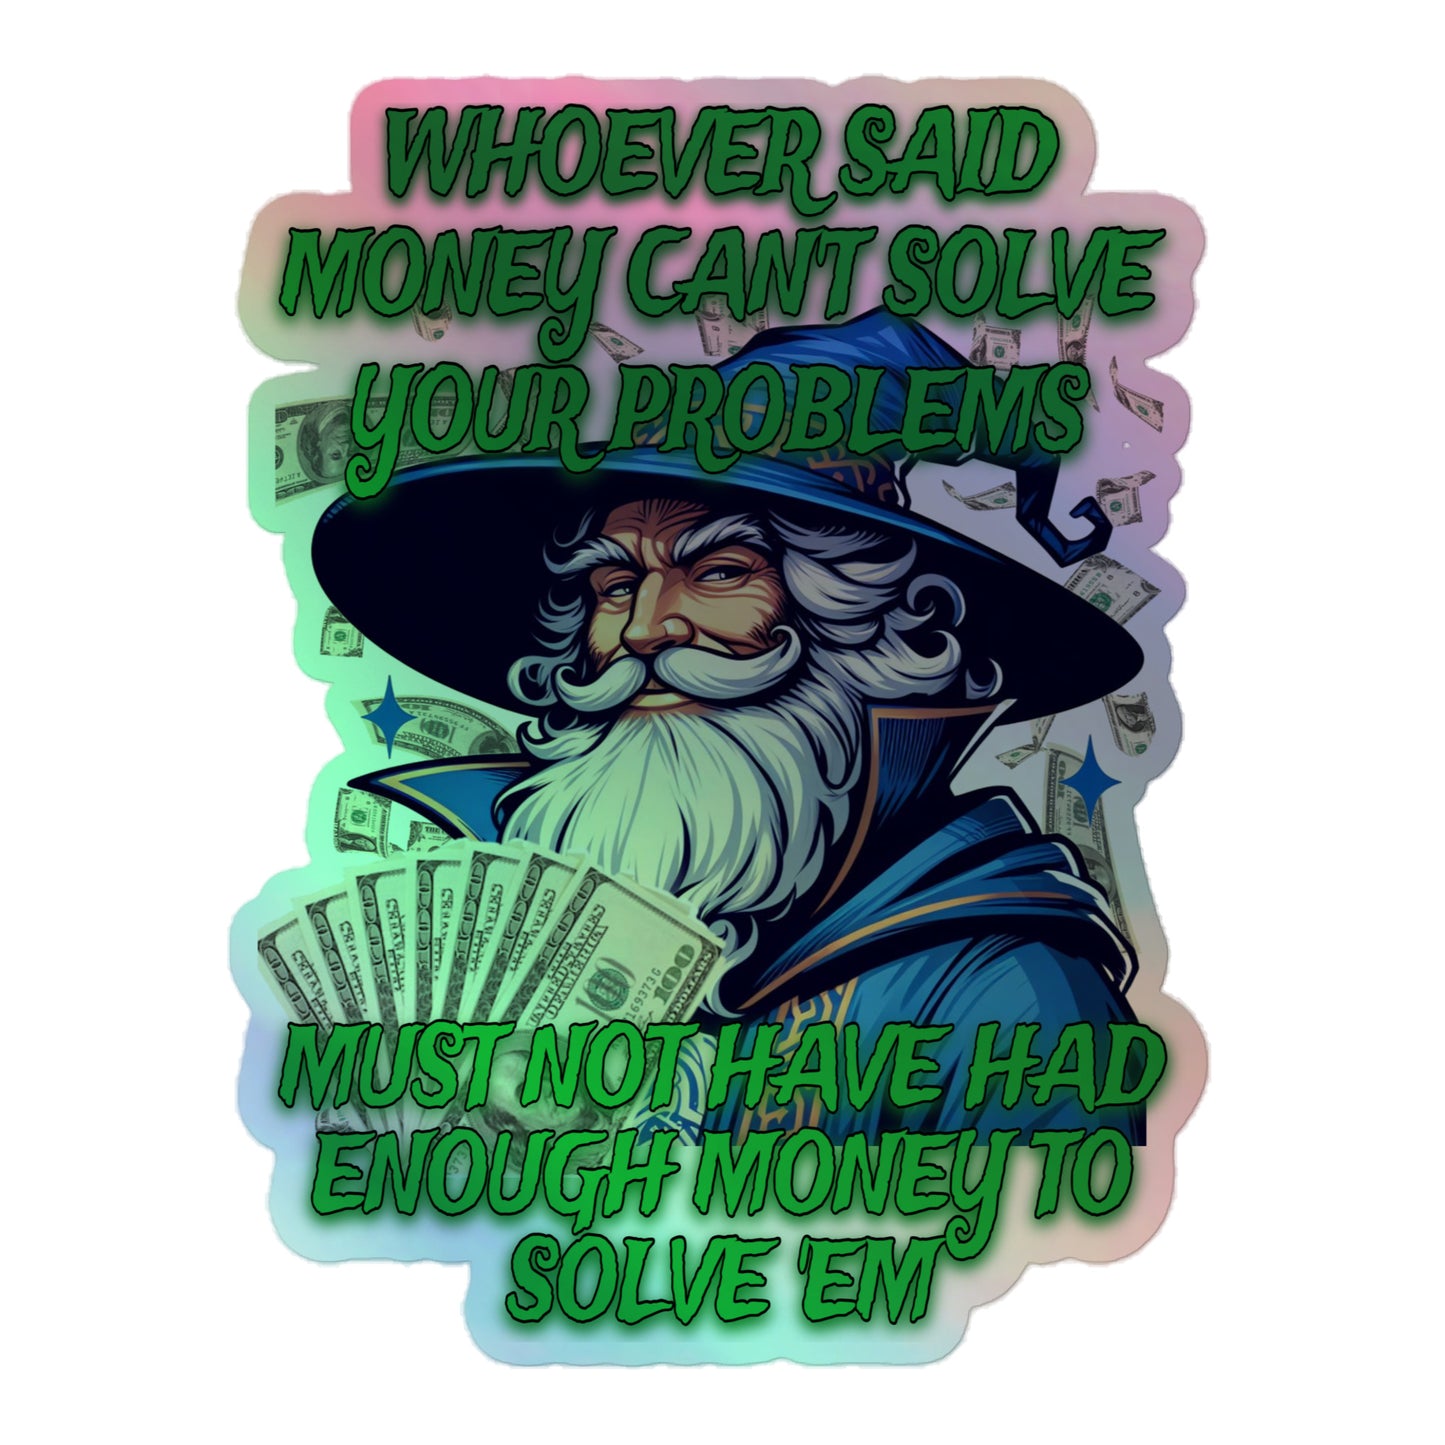 Whoever said money can't solve your problems (Sticker)